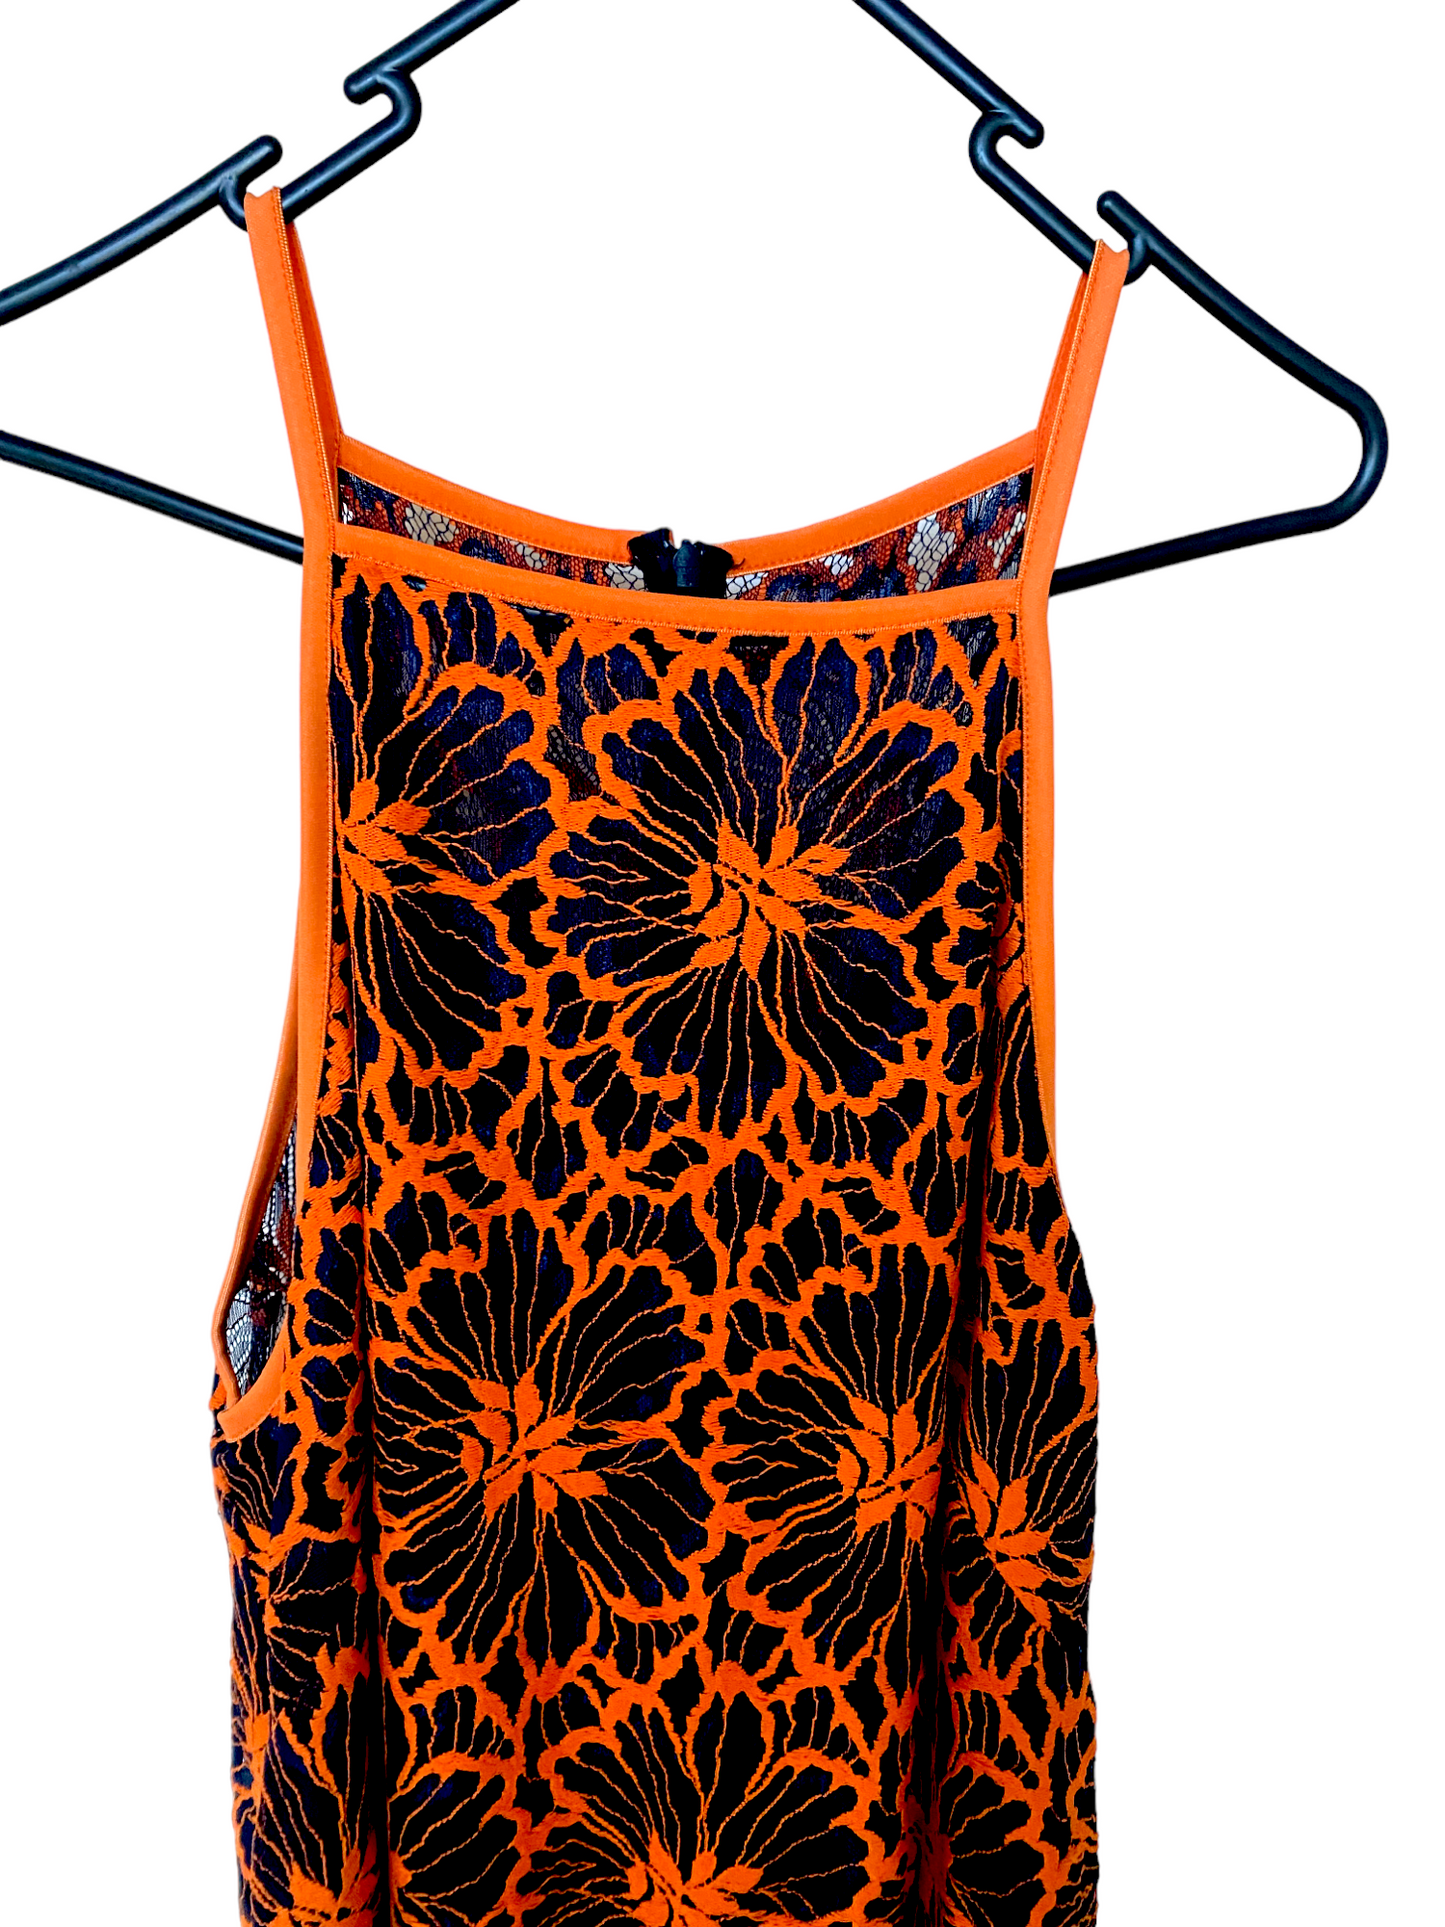 CUE Cue Contrast Floral Midi Dress | Lace Overlay, Navy & Orange, Partial Lining